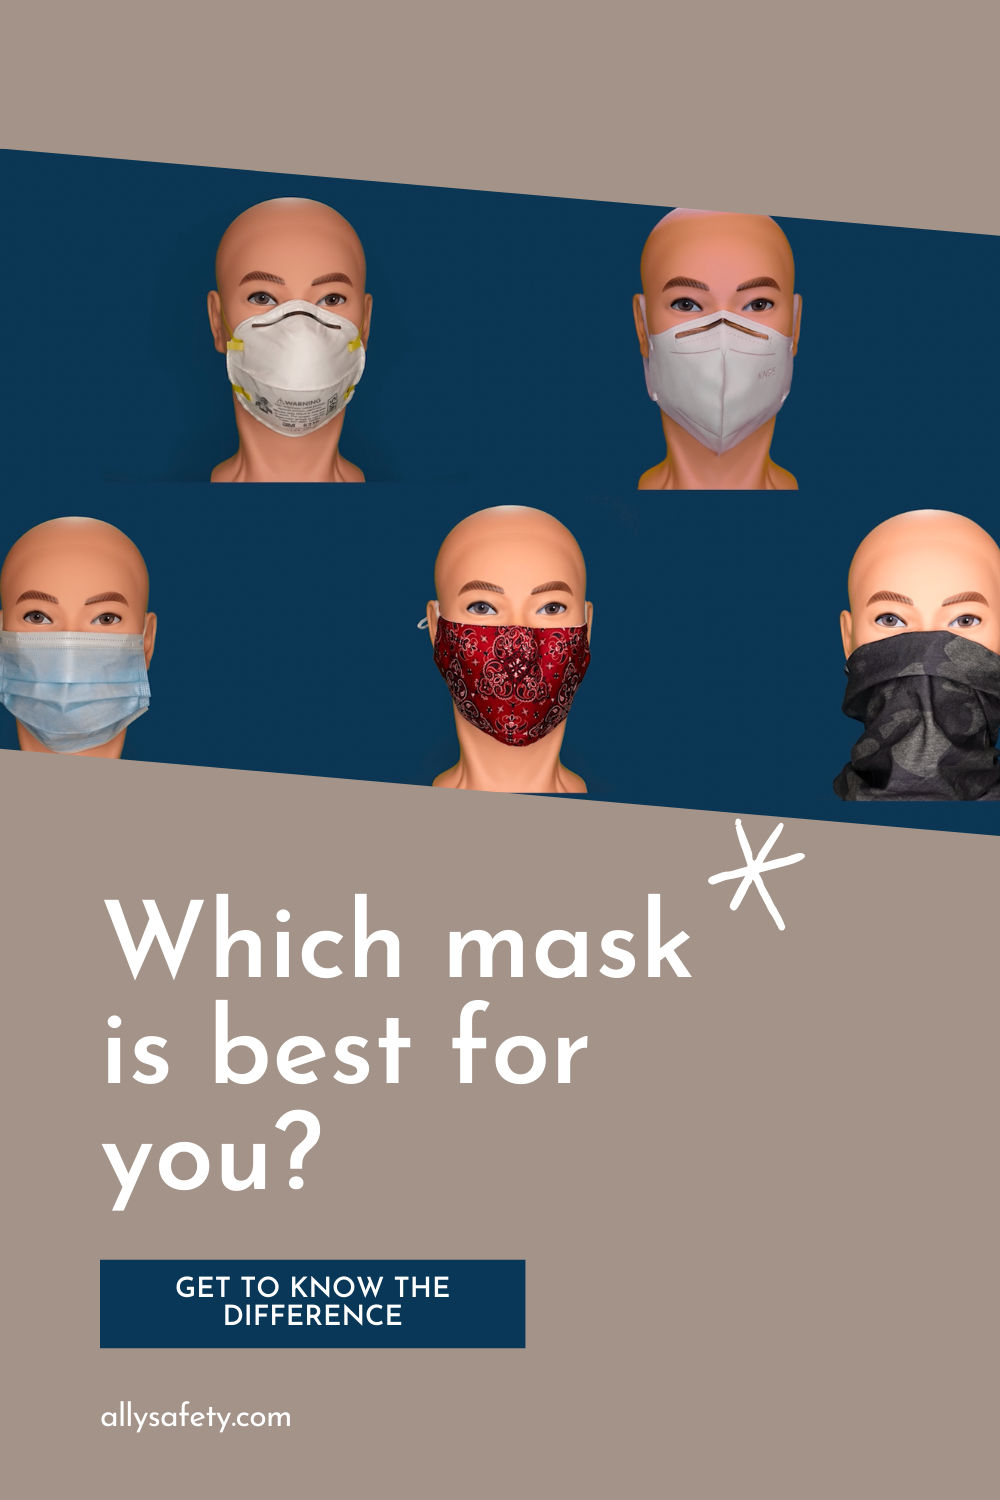 Which mask is best for you?